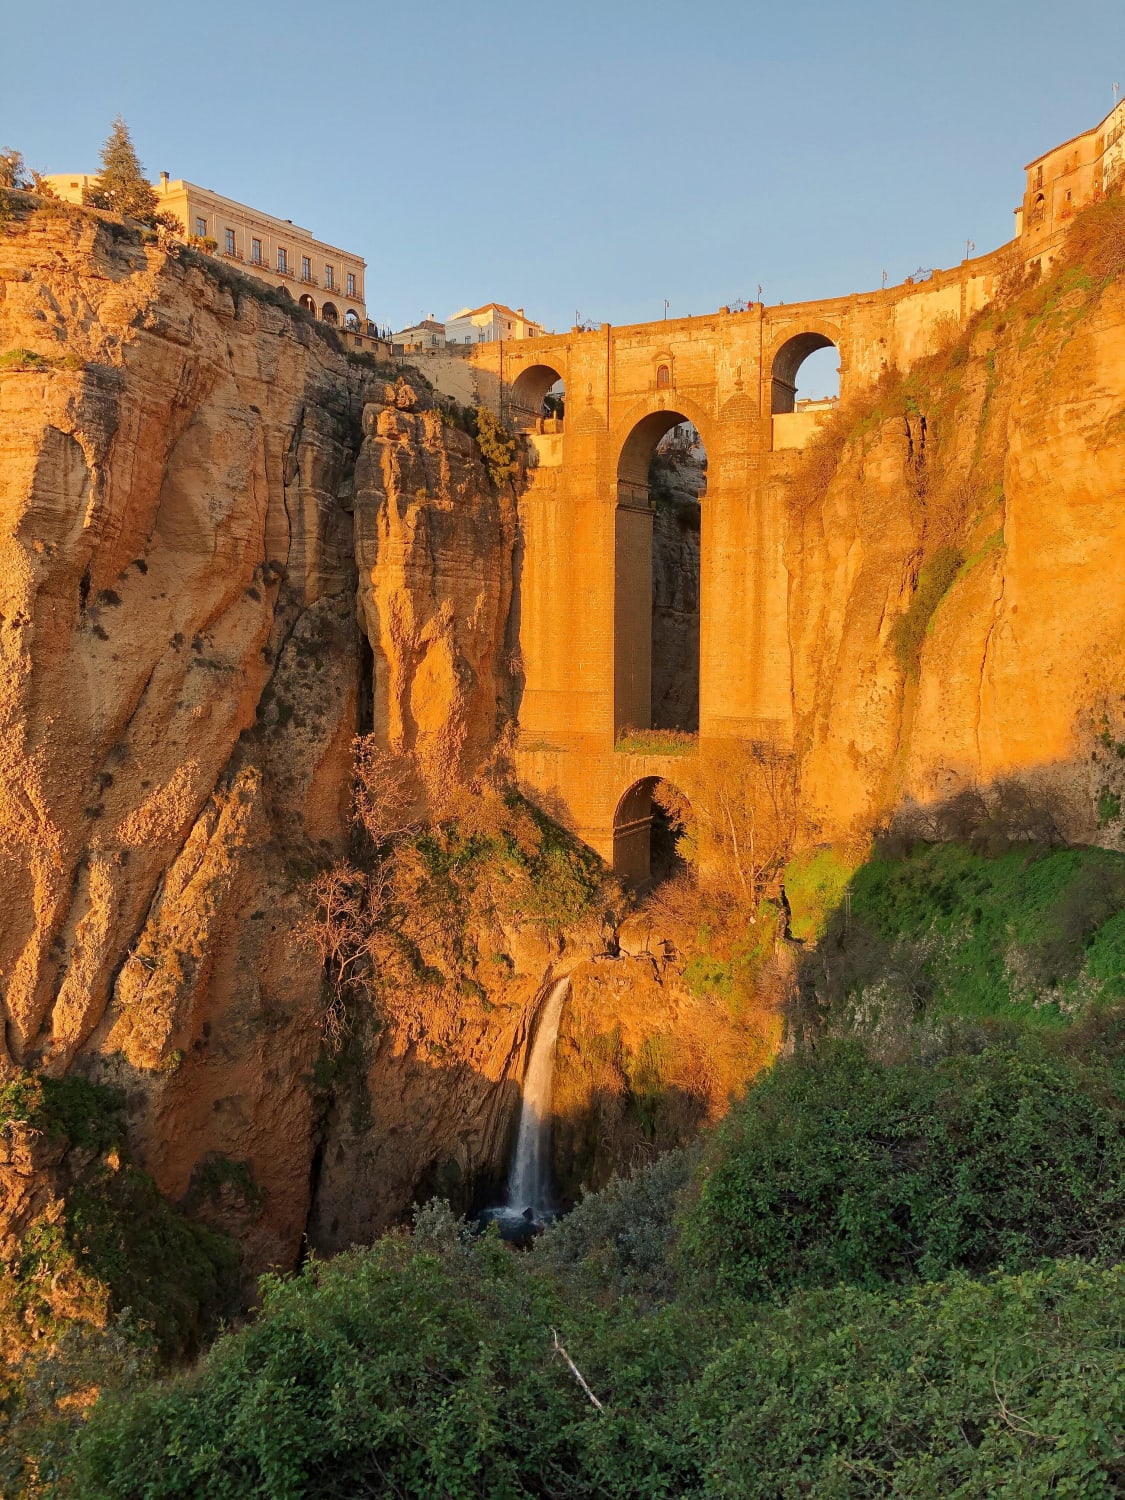 Puente Nuevo in Ronda, Spain at sunset. I was in awe of the beauty here.